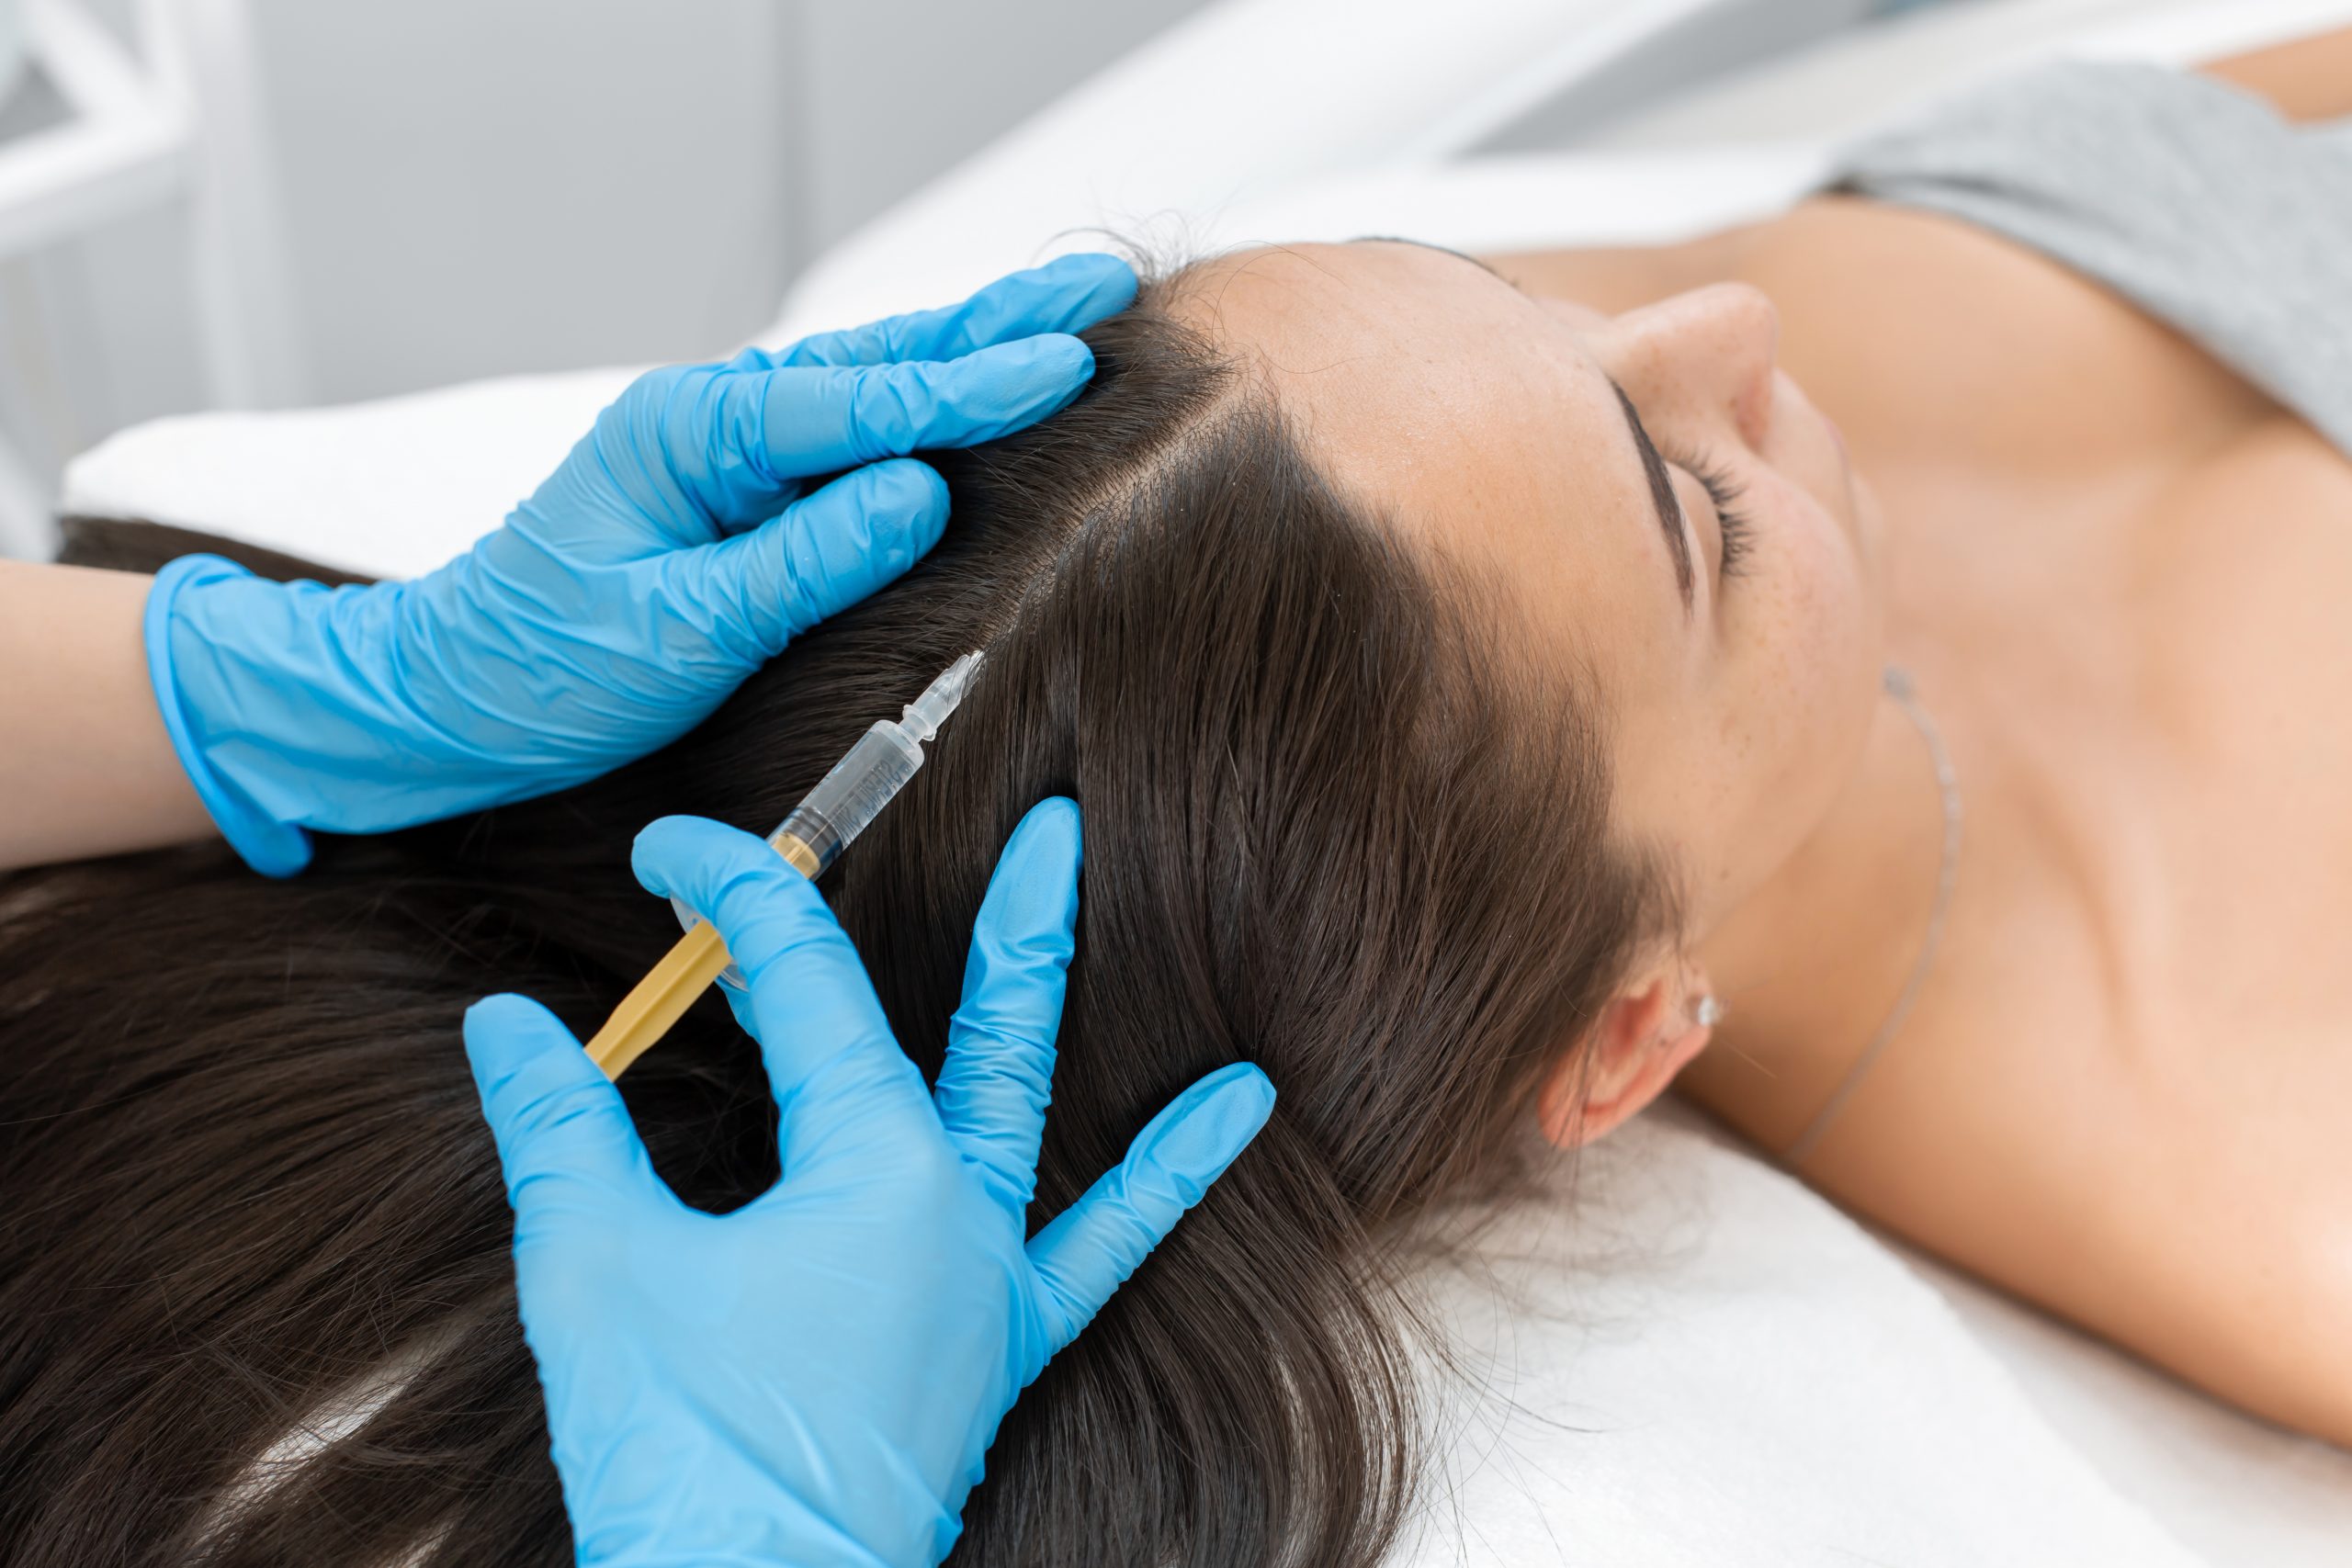 Forefront Dermatology Aesthetic Center  Introducing PRP Injections For Hair  Loss PRP Platelet Enriched Plasma therapy for hair loss is the latest  trend for hair growth and hair loss treatments It a